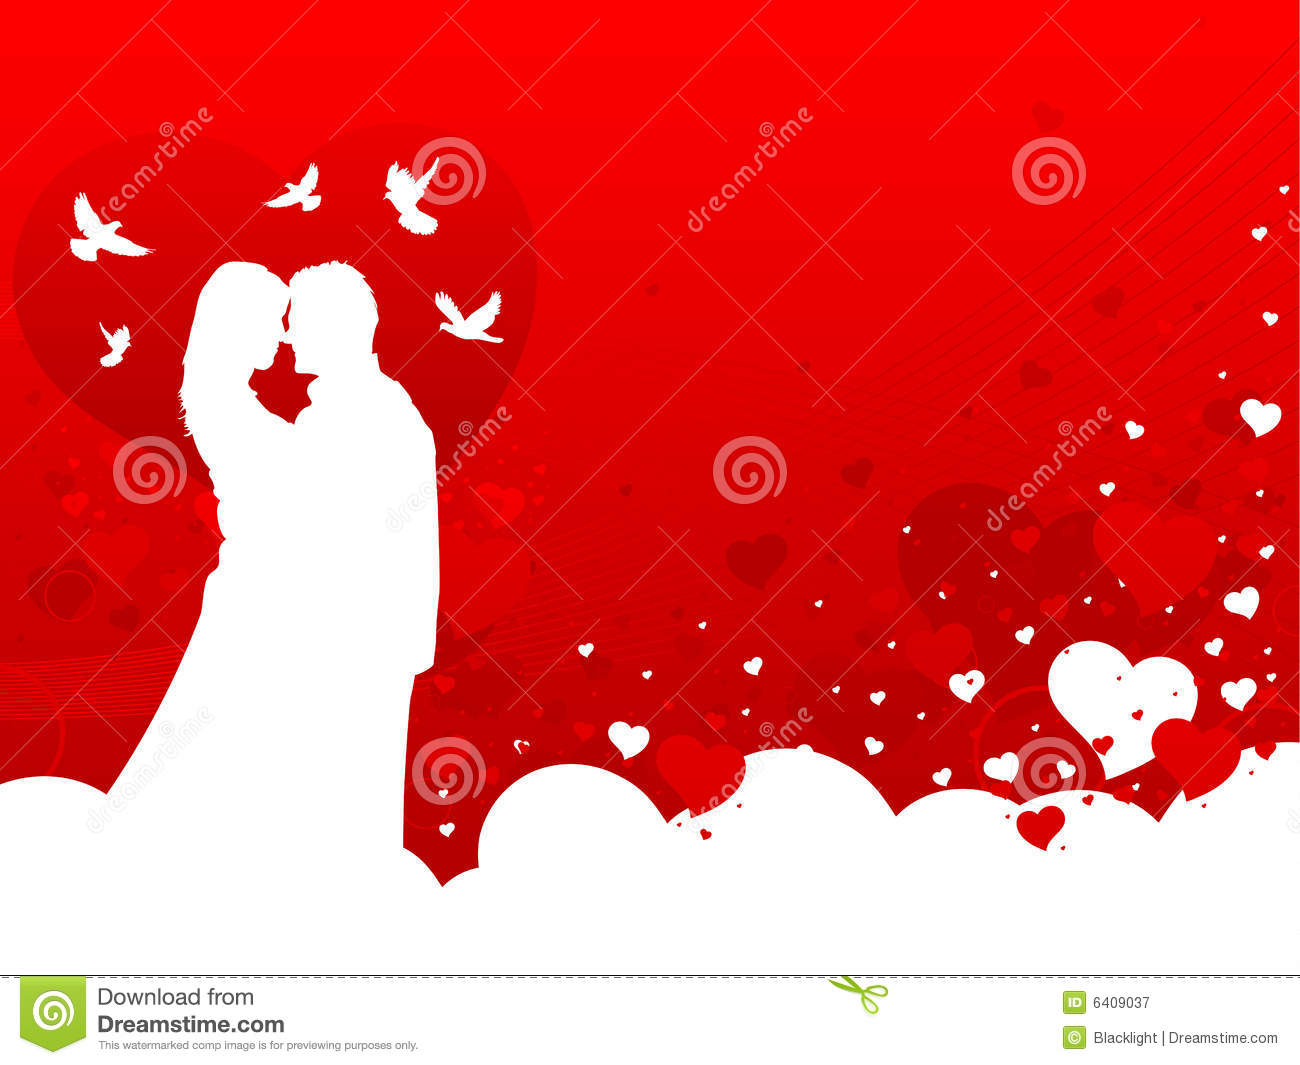 Silhouette Of Loving Couple In White With Red Hearts Background 